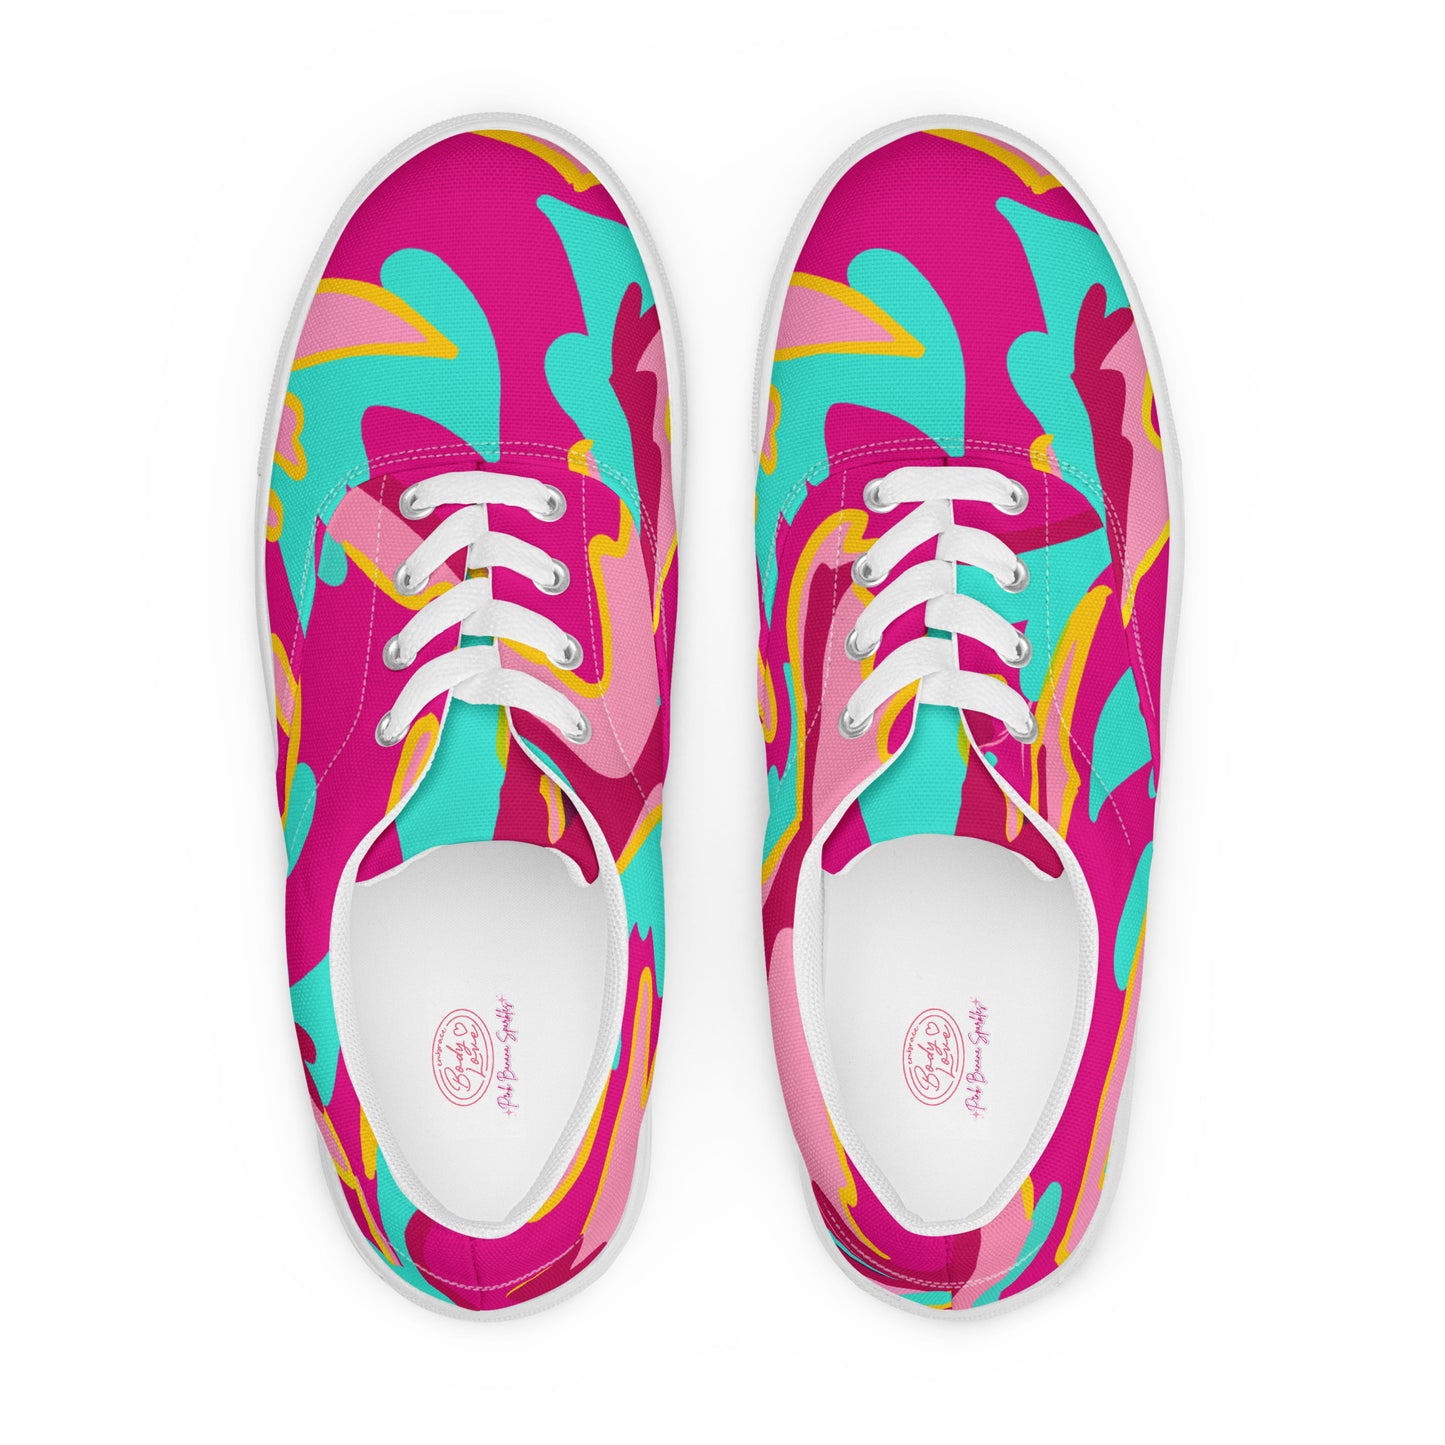 Embrace Body Love Lace-up Canvas Shoes, Hot Pink (Women's Sizing)